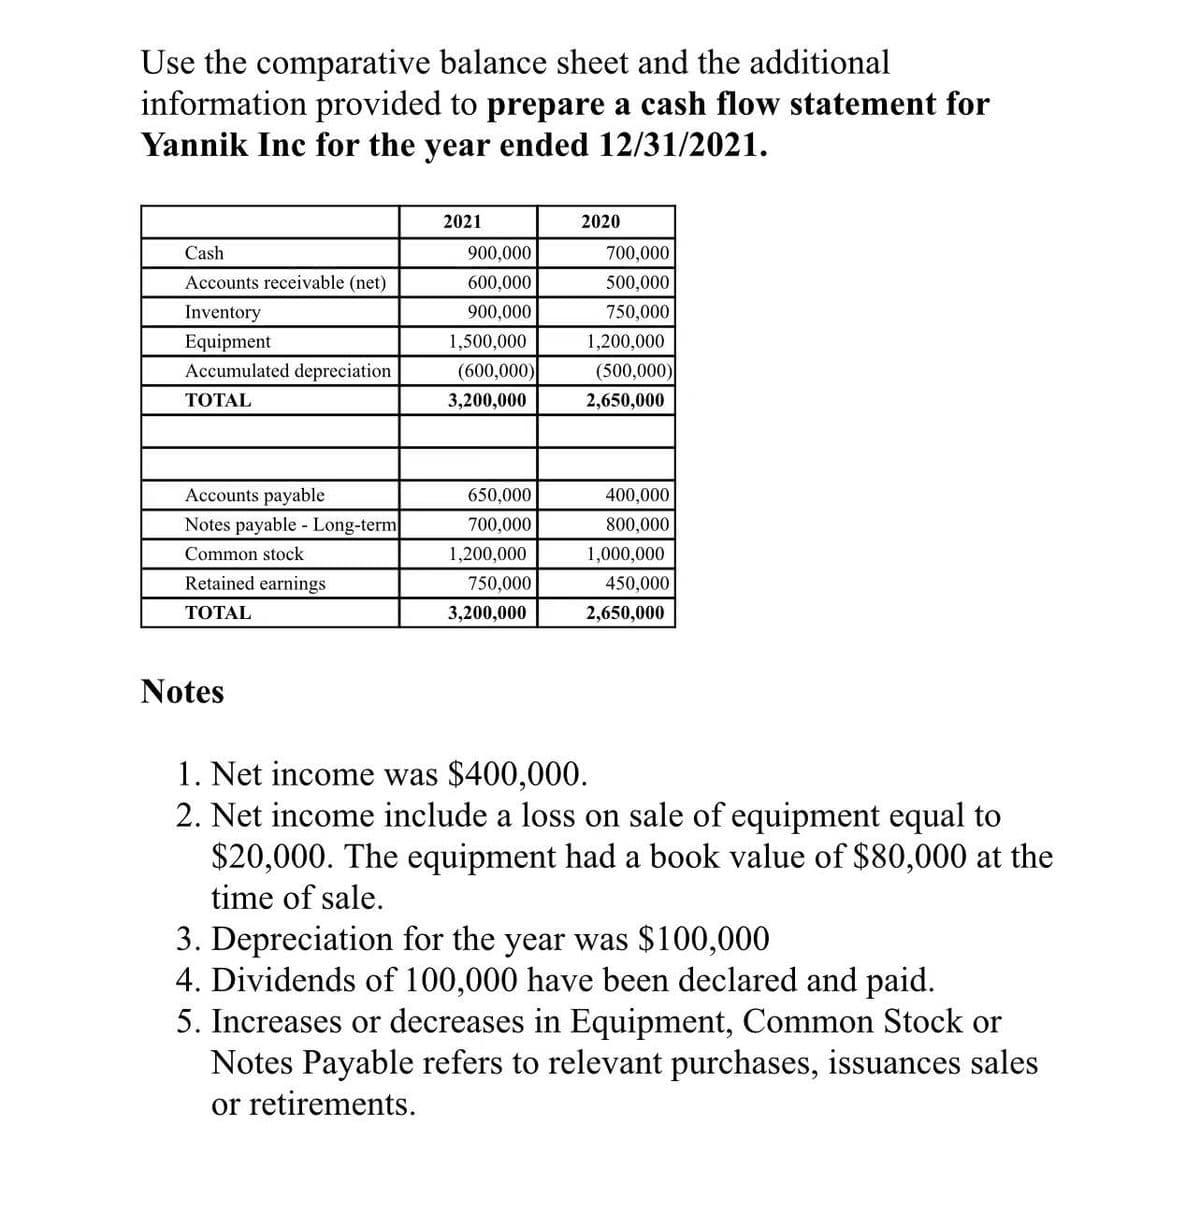 Use the comparative balance sheet and the additional
information provided to prepare a cash flow statement for
Yannik Inc for the year ended 12/31/2021.
Cash
Accounts receivable (net)
Inventory
Equipment
Accumulated depreciation
TOTAL
Accounts payable
Notes payable - Long-term
Common stock
Retained earnings
TOTAL
Notes
2021
900,000
600,000
900,000
1,500,000
(600,000)
3,200,000
650,000
700,000
1,200,000
750,000
3,200,000
2020
700,000
500,000
750,000
1,200,000
(500,000)
2,650,000
400,000
800,000
1,000,000
450,000
2,650,000
1. Net income was $400,000.
2. Net income include a loss on sale of equipment equal to
$20,000. The equipment had a book value of $80,000 at the
time of sale.
3. Depreciation for the year was $100,000
4. Dividends of 100,000 have been declared and paid.
5. Increases or decreases in Equipment, Common Stock or
Notes Payable refers to relevant purchases, issuances sales
or retirements.